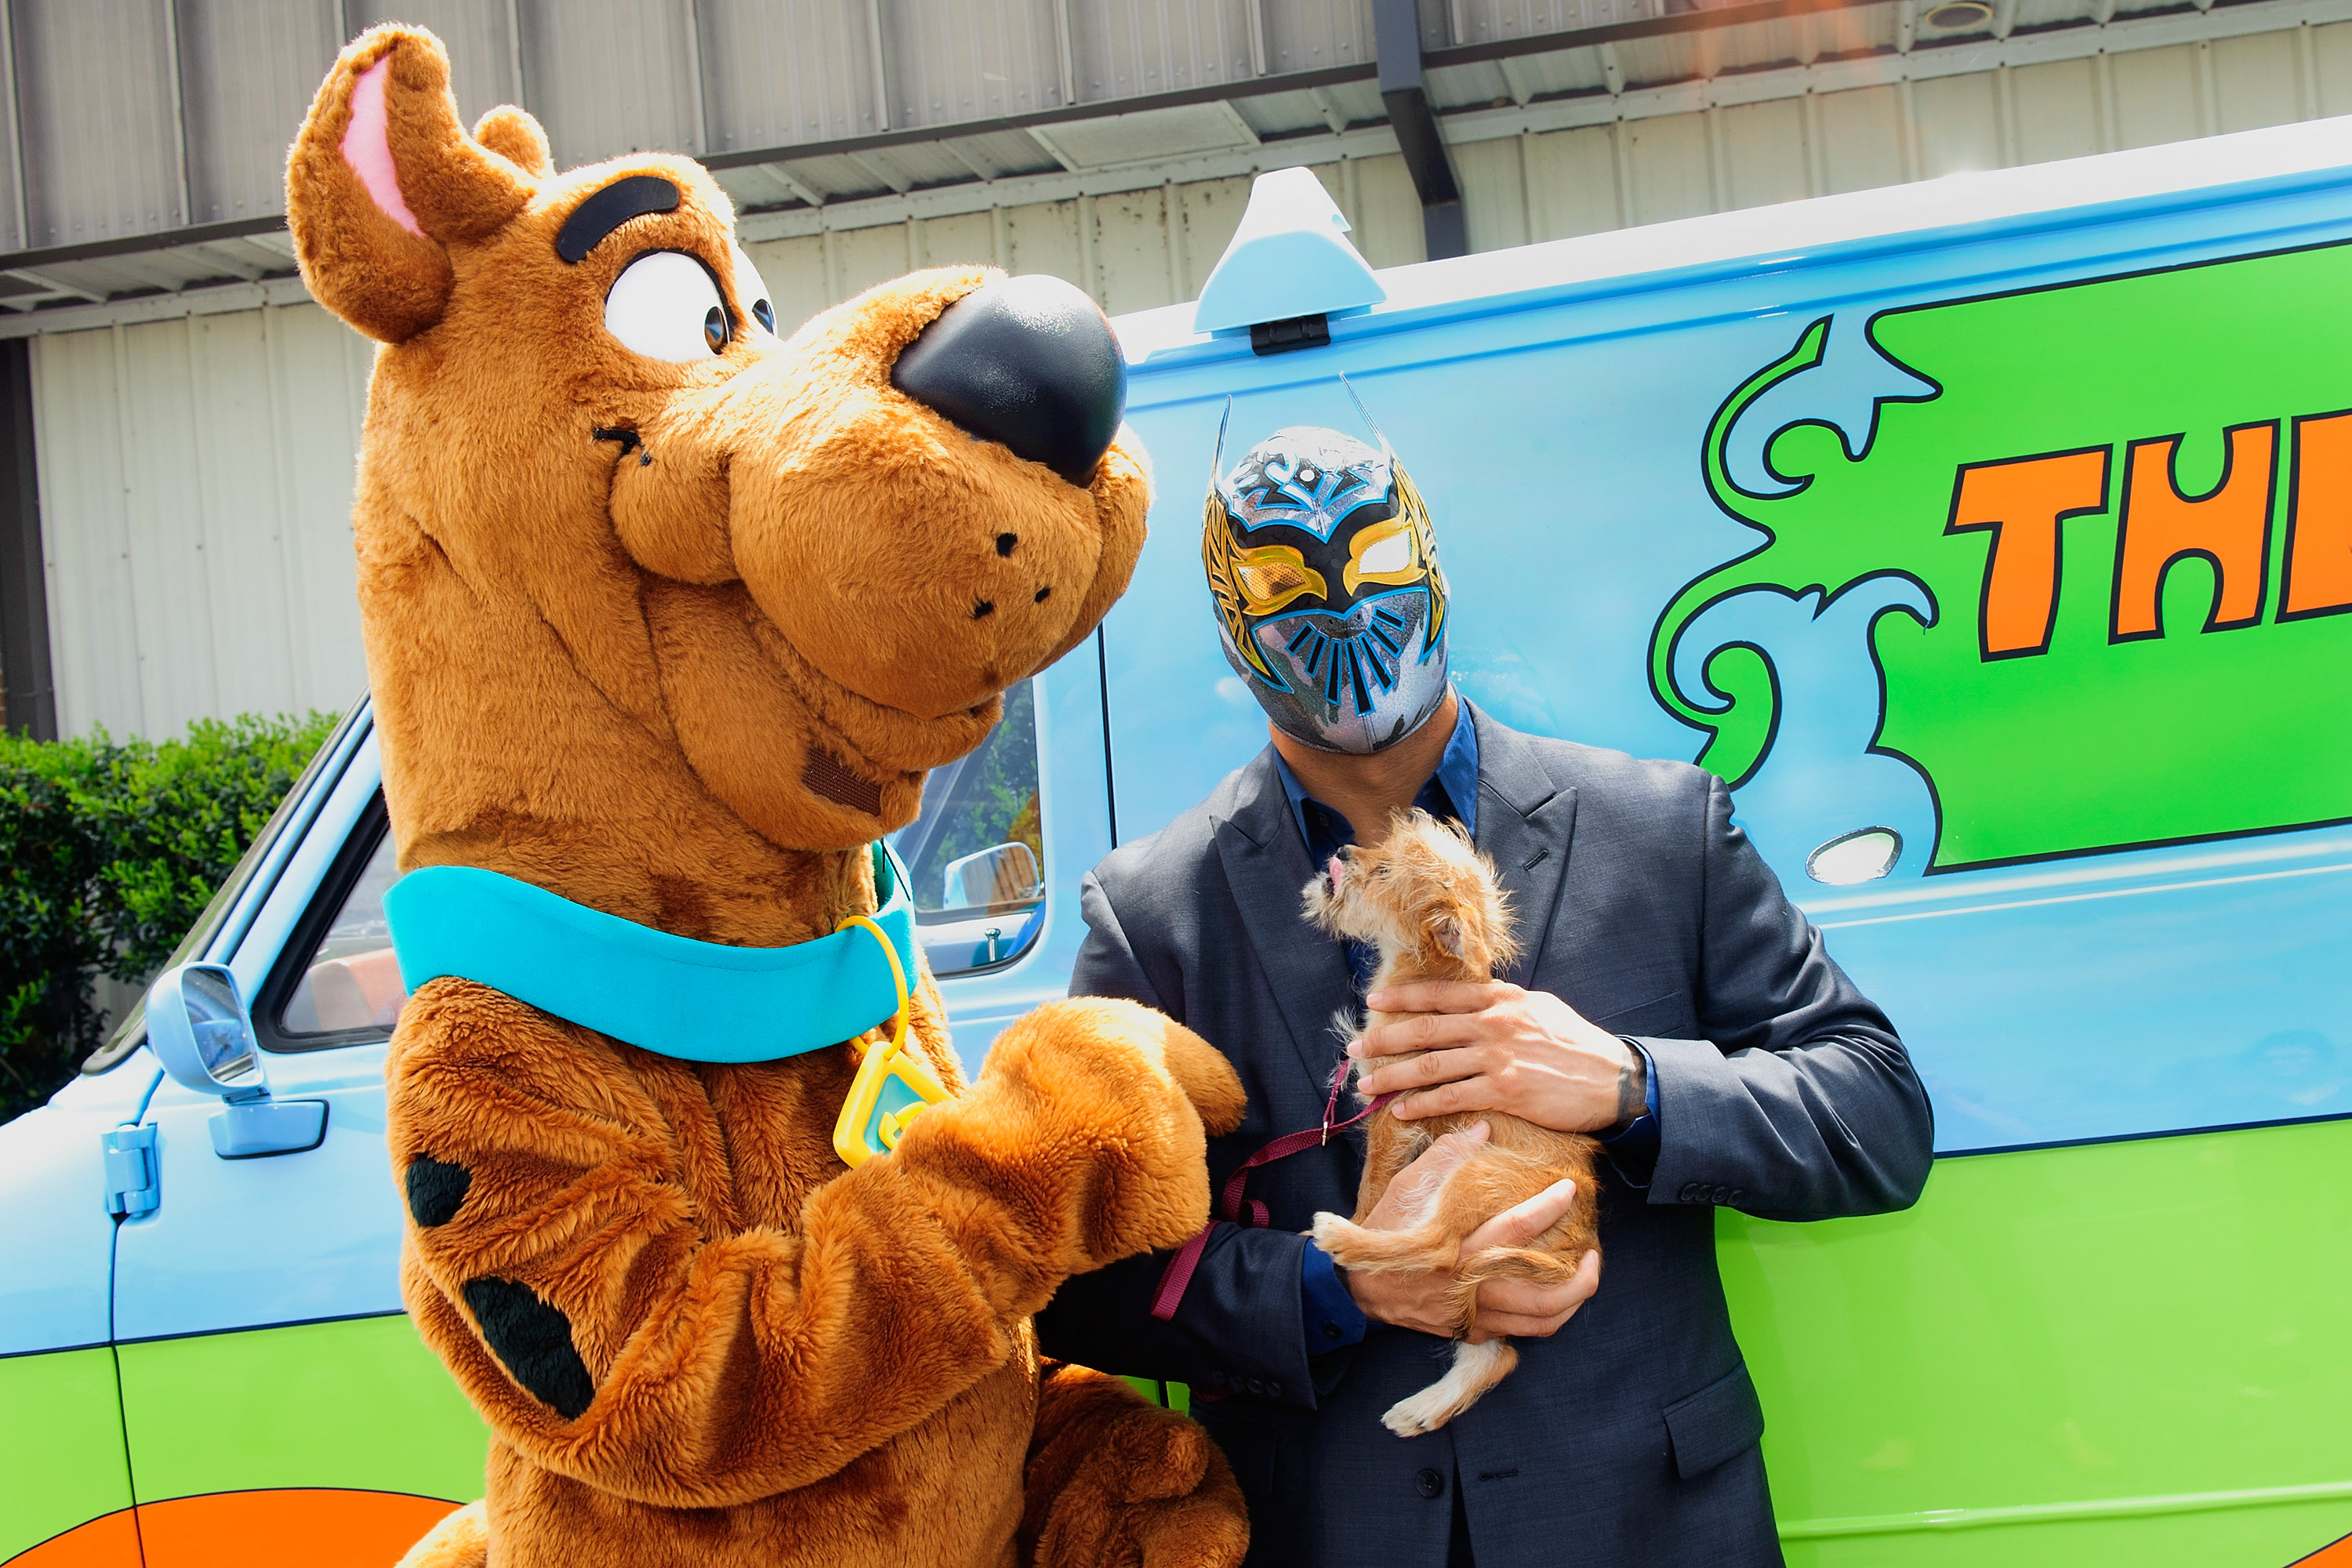 KENNER, LA - APRIL 07:  Scooby-Doo and WWE wrestler Sin Cara pose in front of The Mystery Machine with one of Jeffreson Parish SPCA's adoptable puppies during Scooby Doo and Sina Cara's special appearance at St. Elizabeth Ann Seton School on April 7, 2014 in Kenner, Louisiana.  (Photo by Erika Goldring/Getty Images)